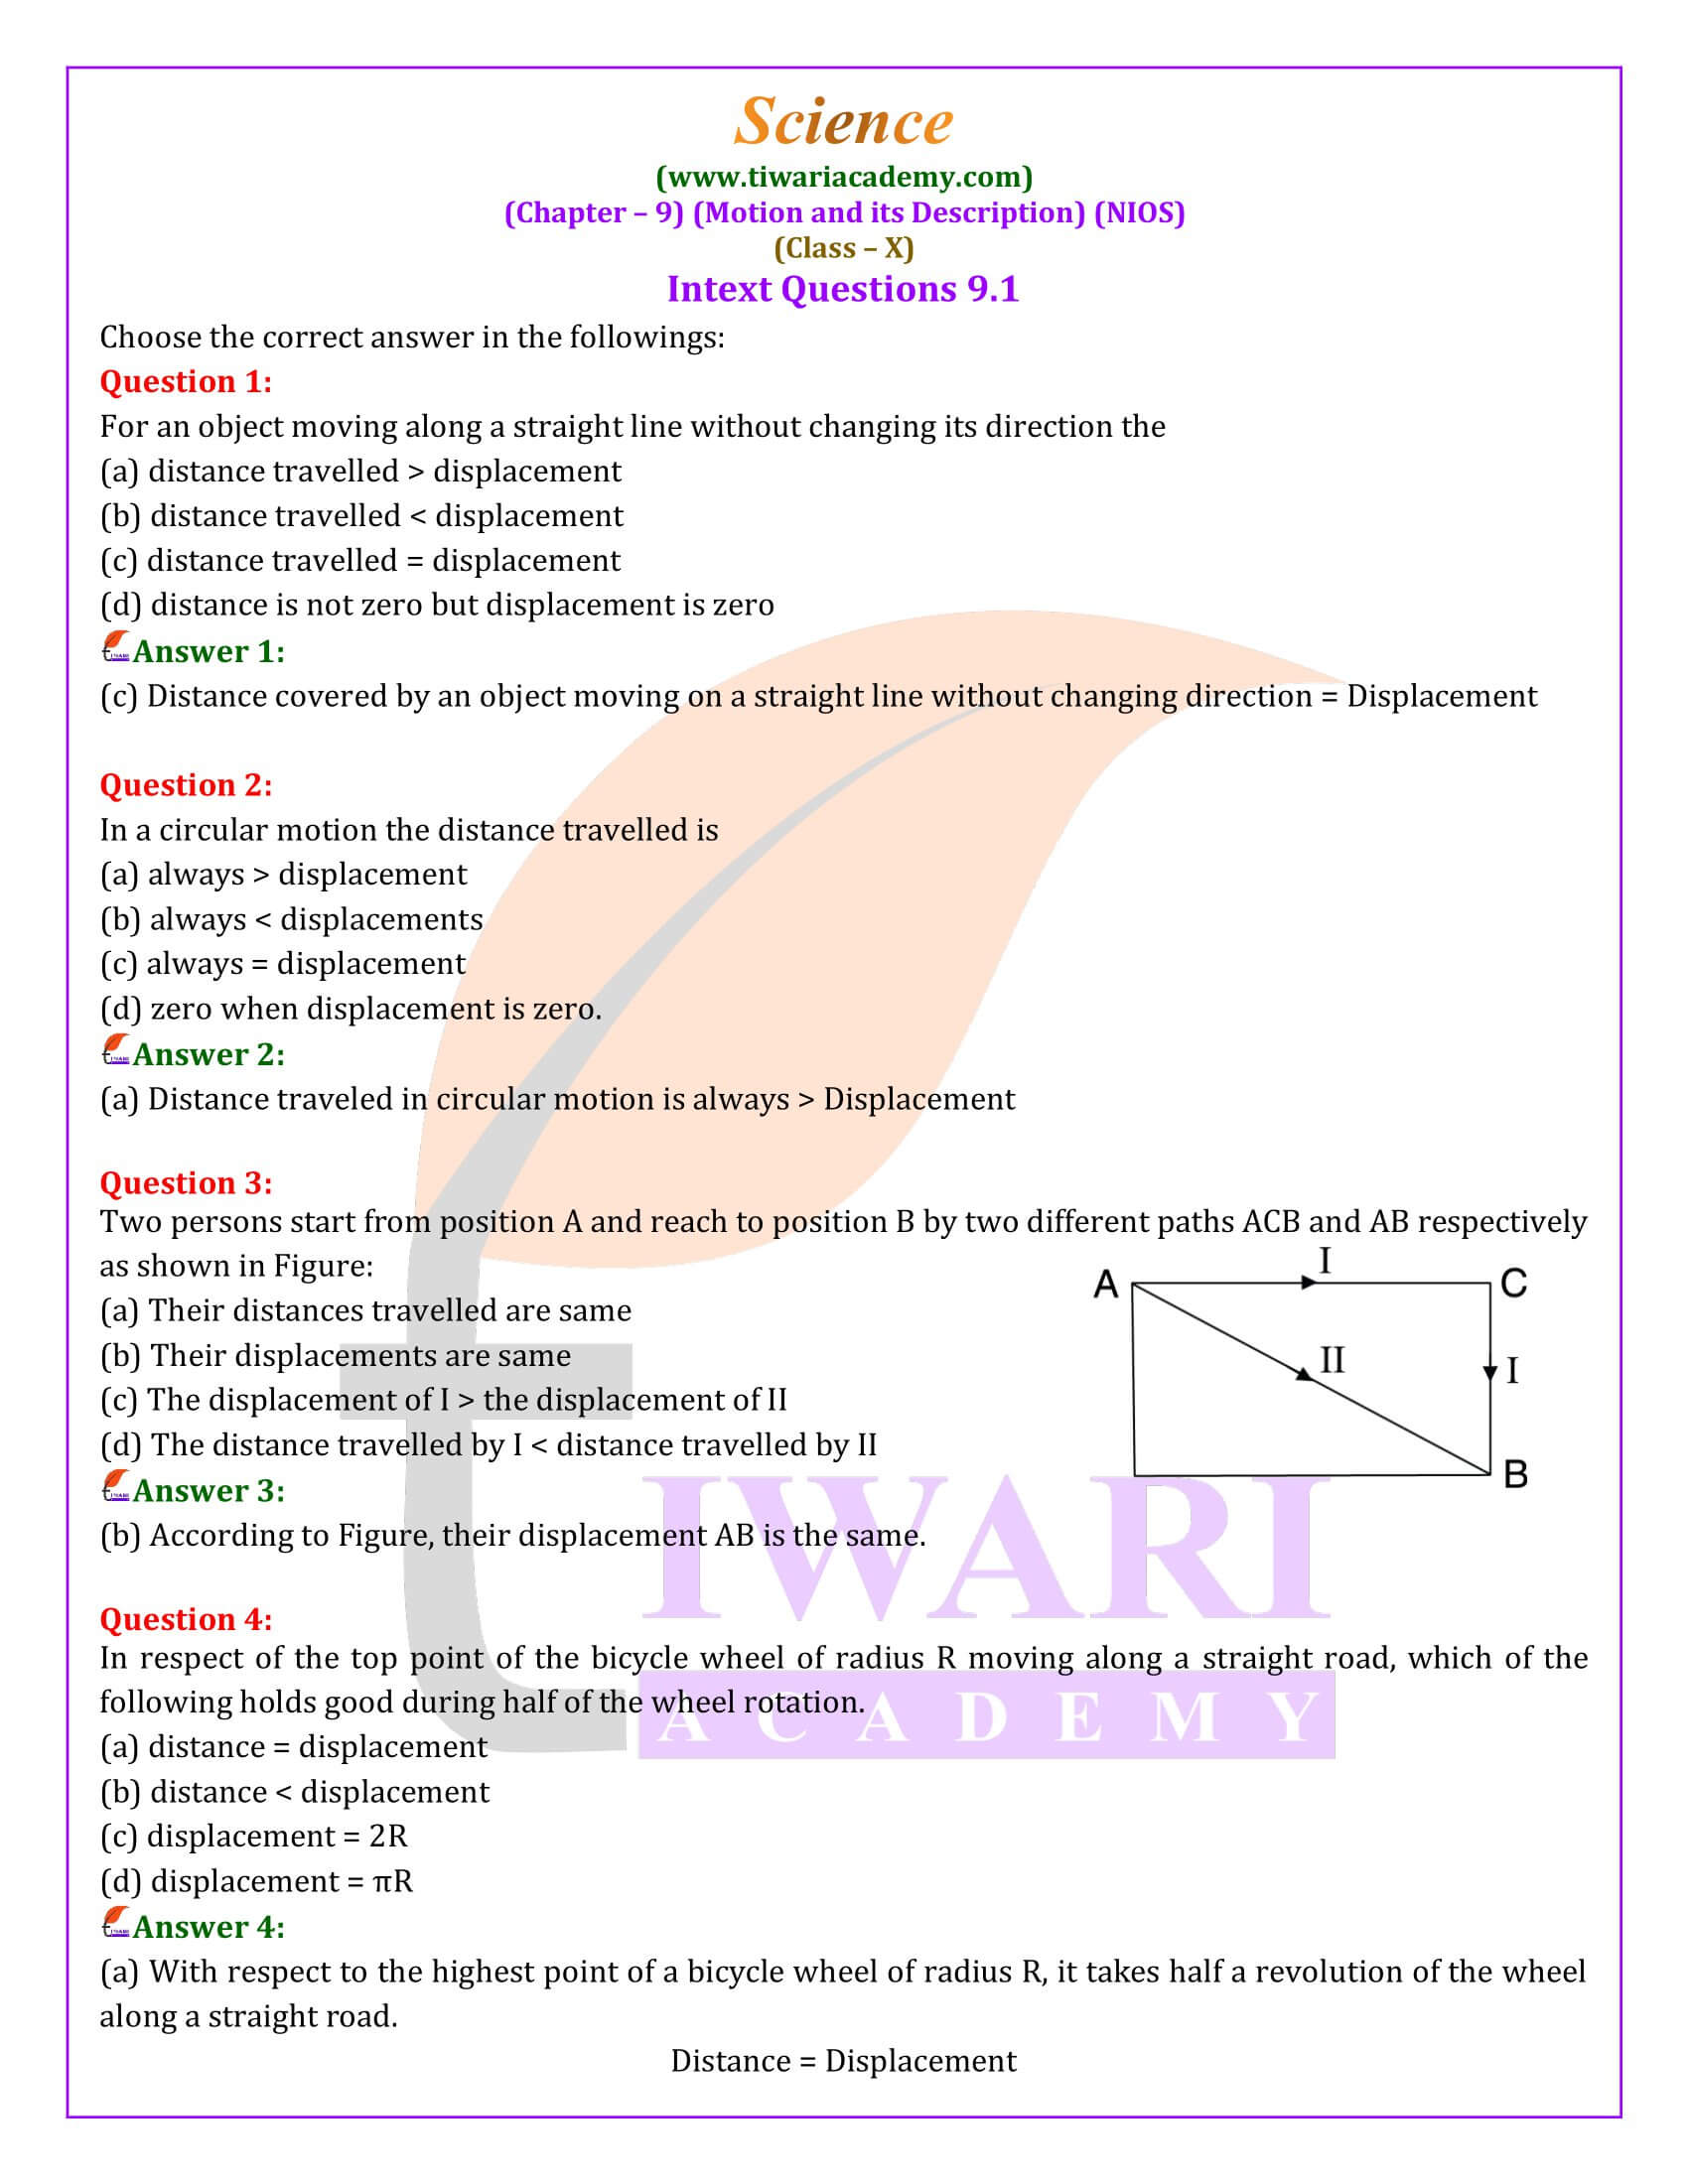 NIOS Class 10 Science Chapter 9 Motion and its Description Question Answers